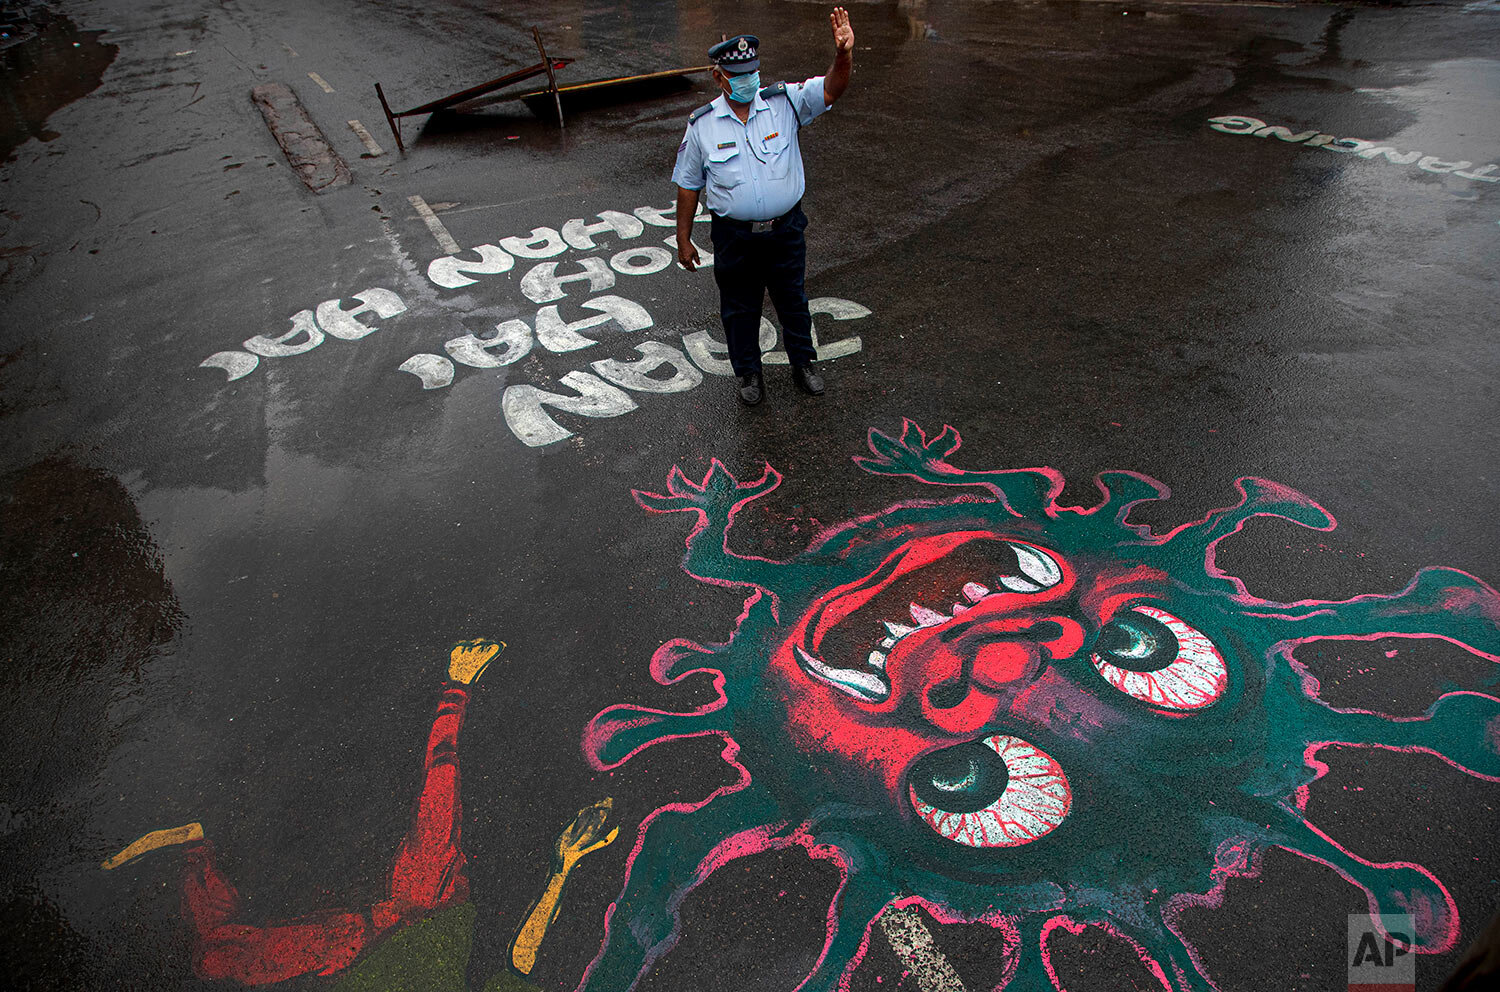  An Indian traffic policeman stands next to an artwork displayed on a road to create awareness about coronavirus during lockdown in Gauhati, India, Wednesday, April 15, 2020. (AP Photo/Anupam Nath) 